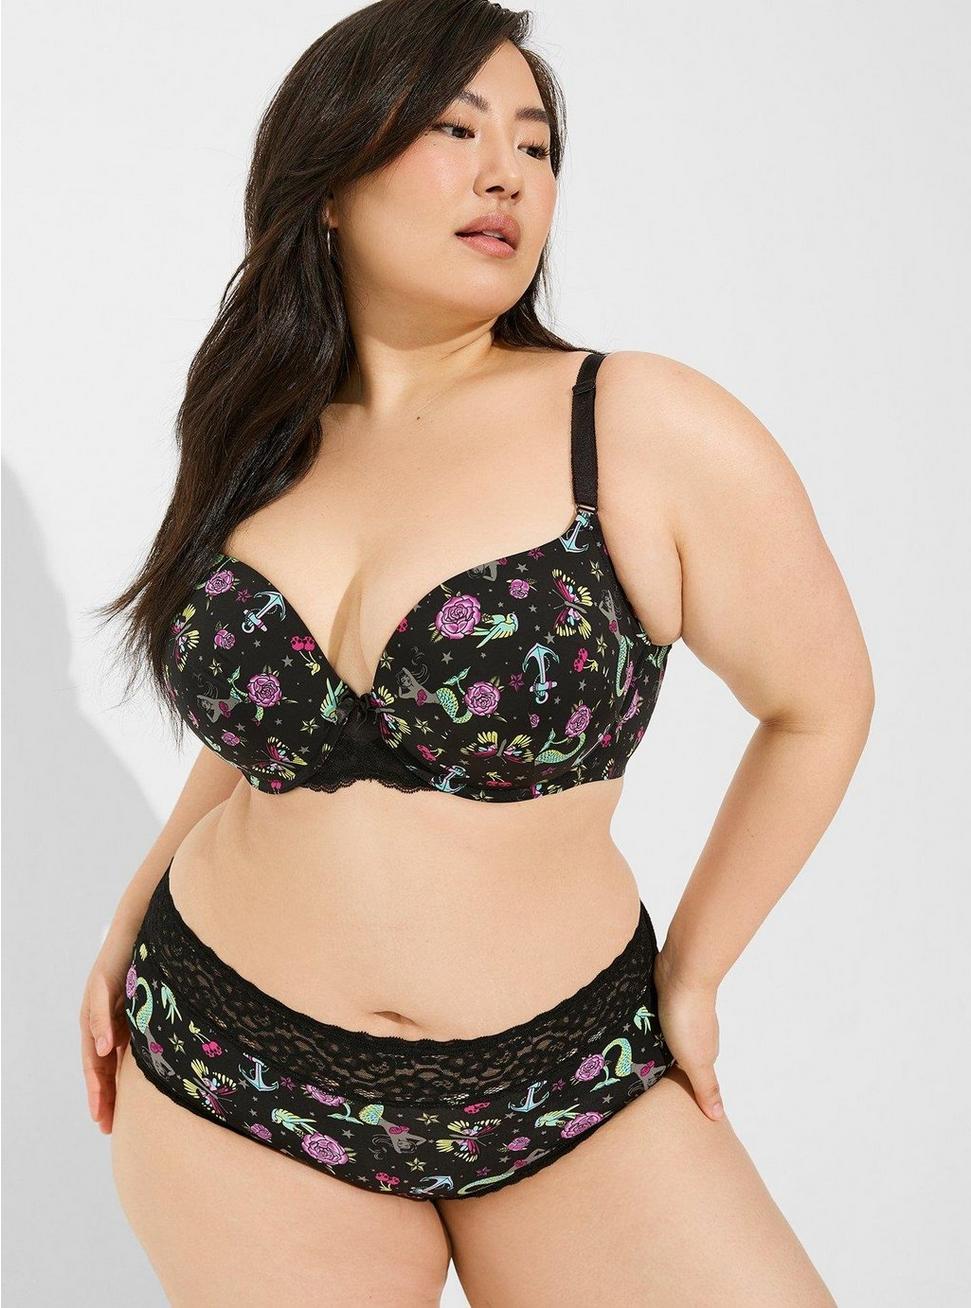 Plus Size Second Skin Mid-Rise Cheeky Lace Trim Panty, TATTOO SINK TOSS RICH BLACK, hi-res